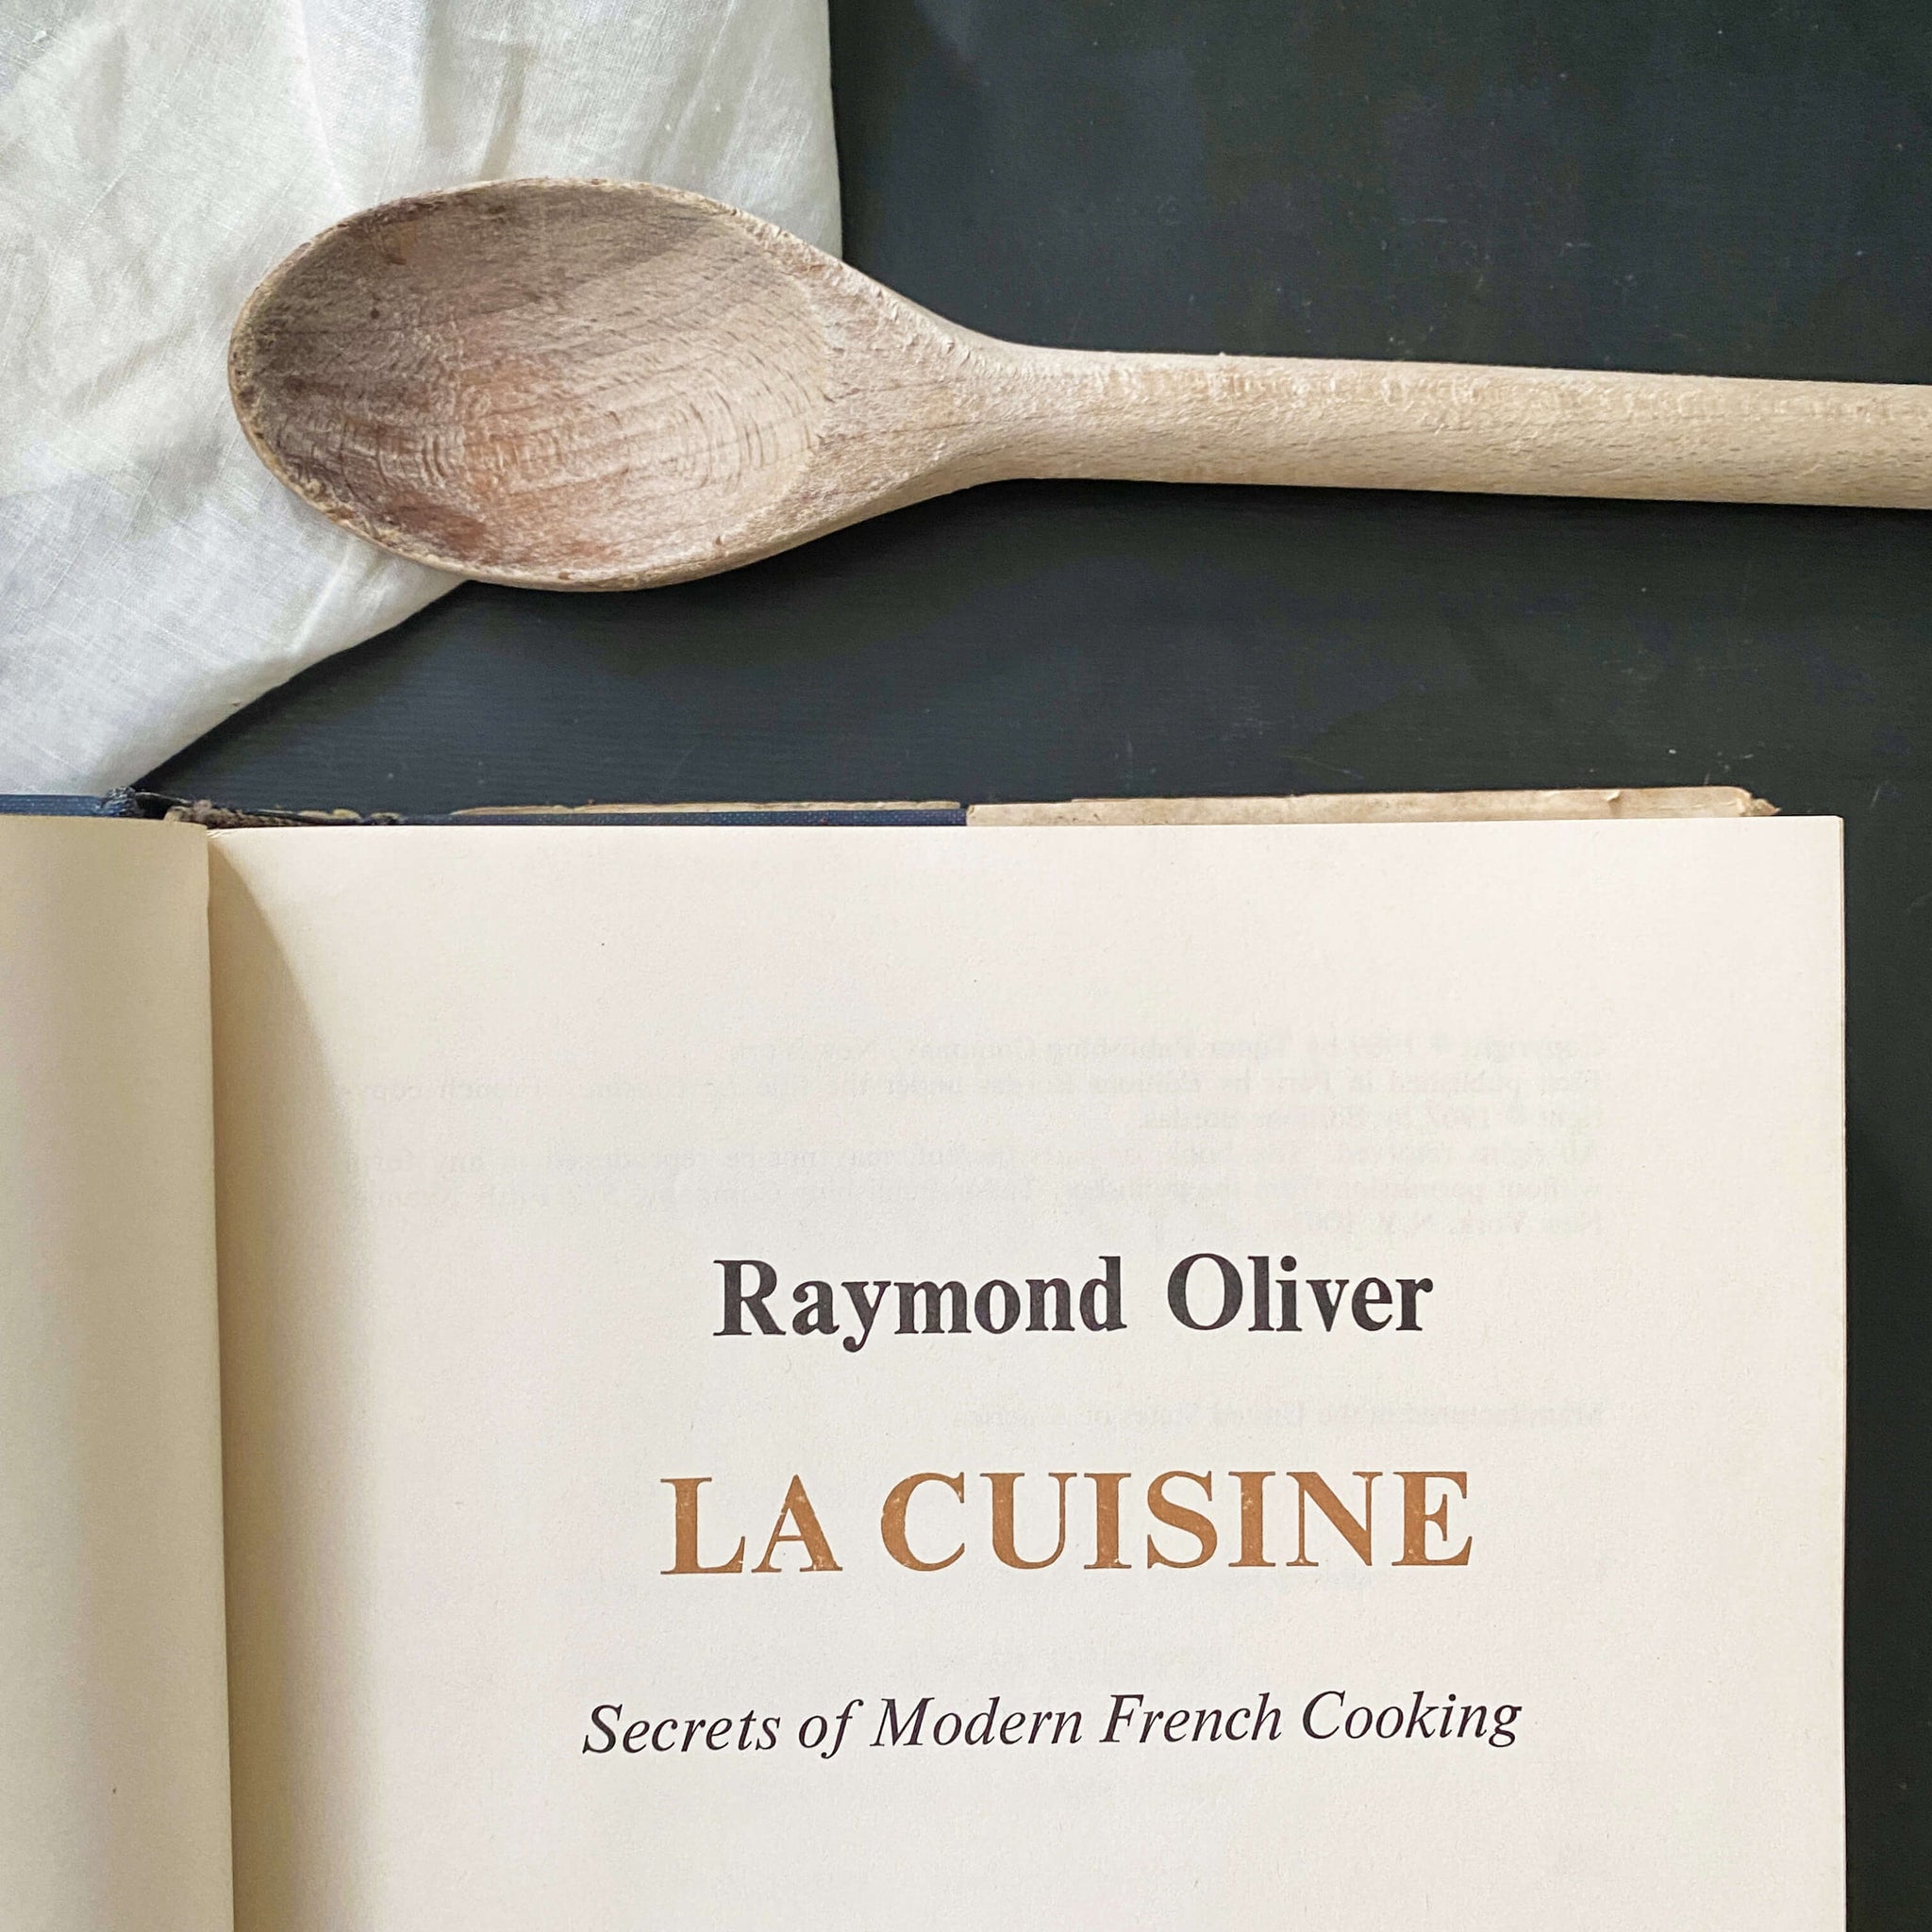 La Cuisine - Raymond Oliver - 1969 Edition - Secrets to Modern French Cooking